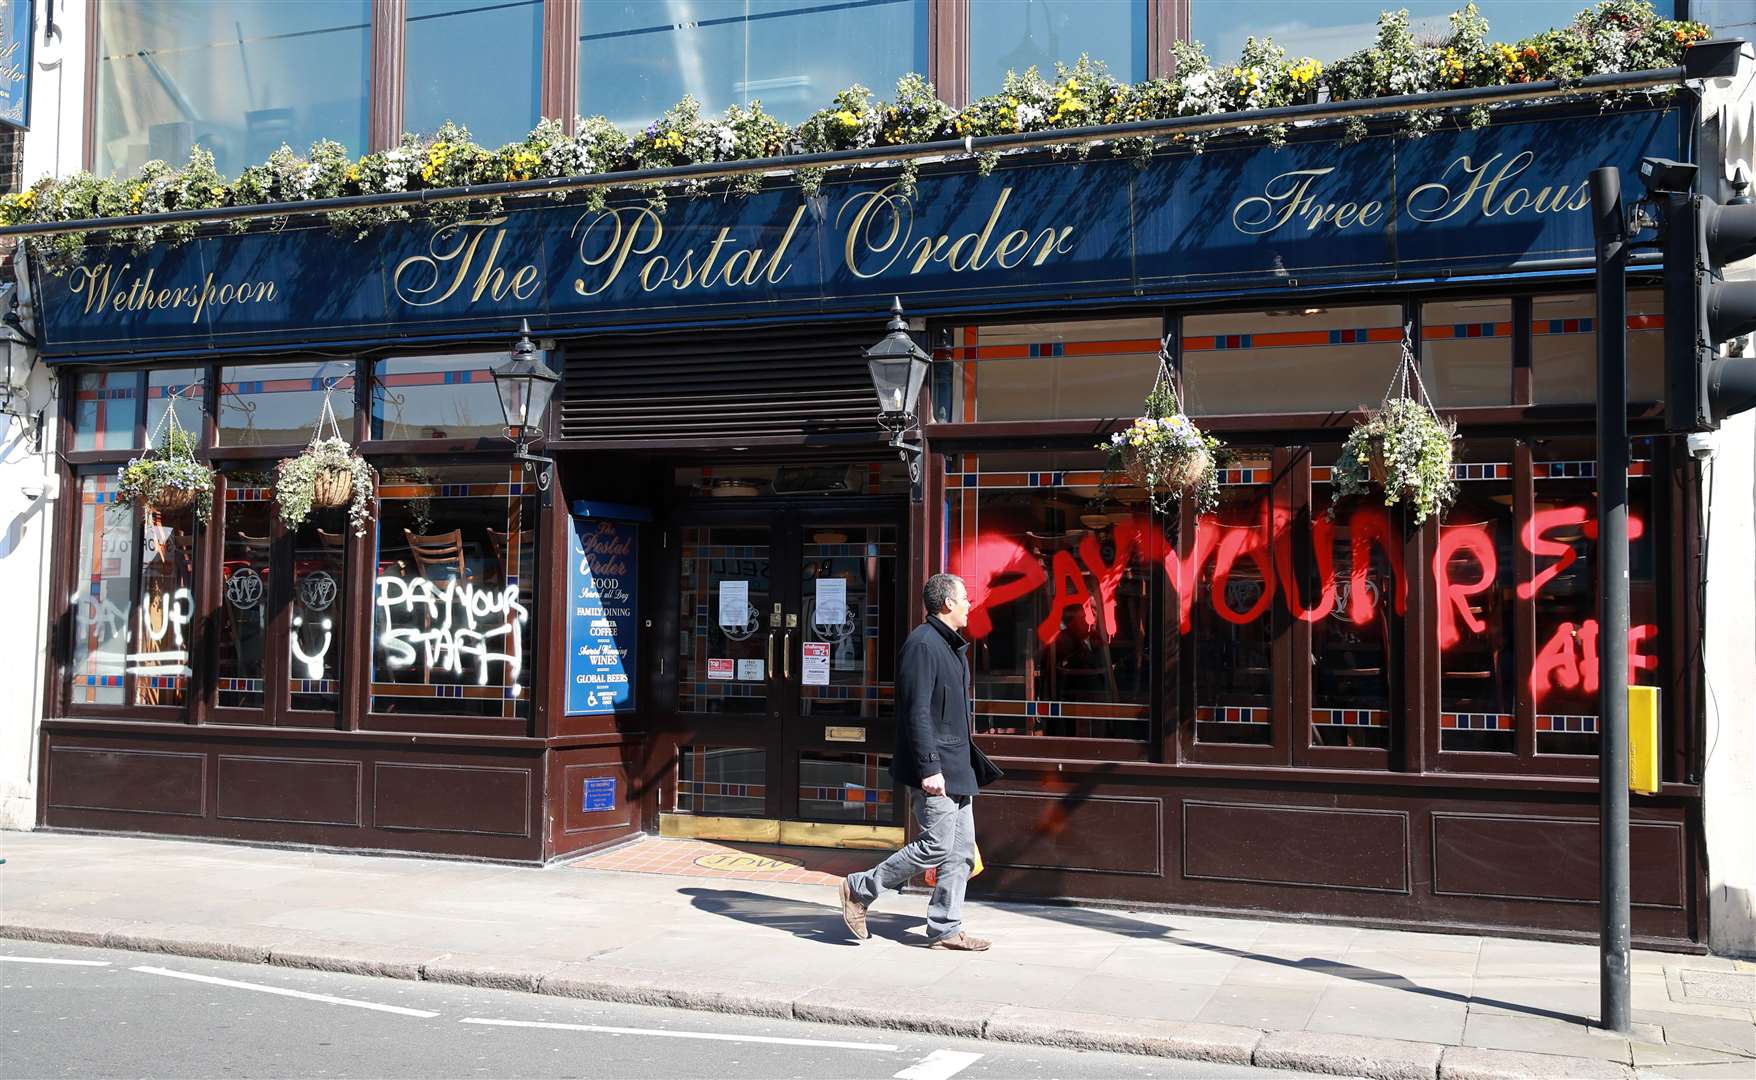 A Wetherspoon’s pub was sprayed with graffiti after founder Tim Martin said staff may not get paid (Adam Davy/PA)